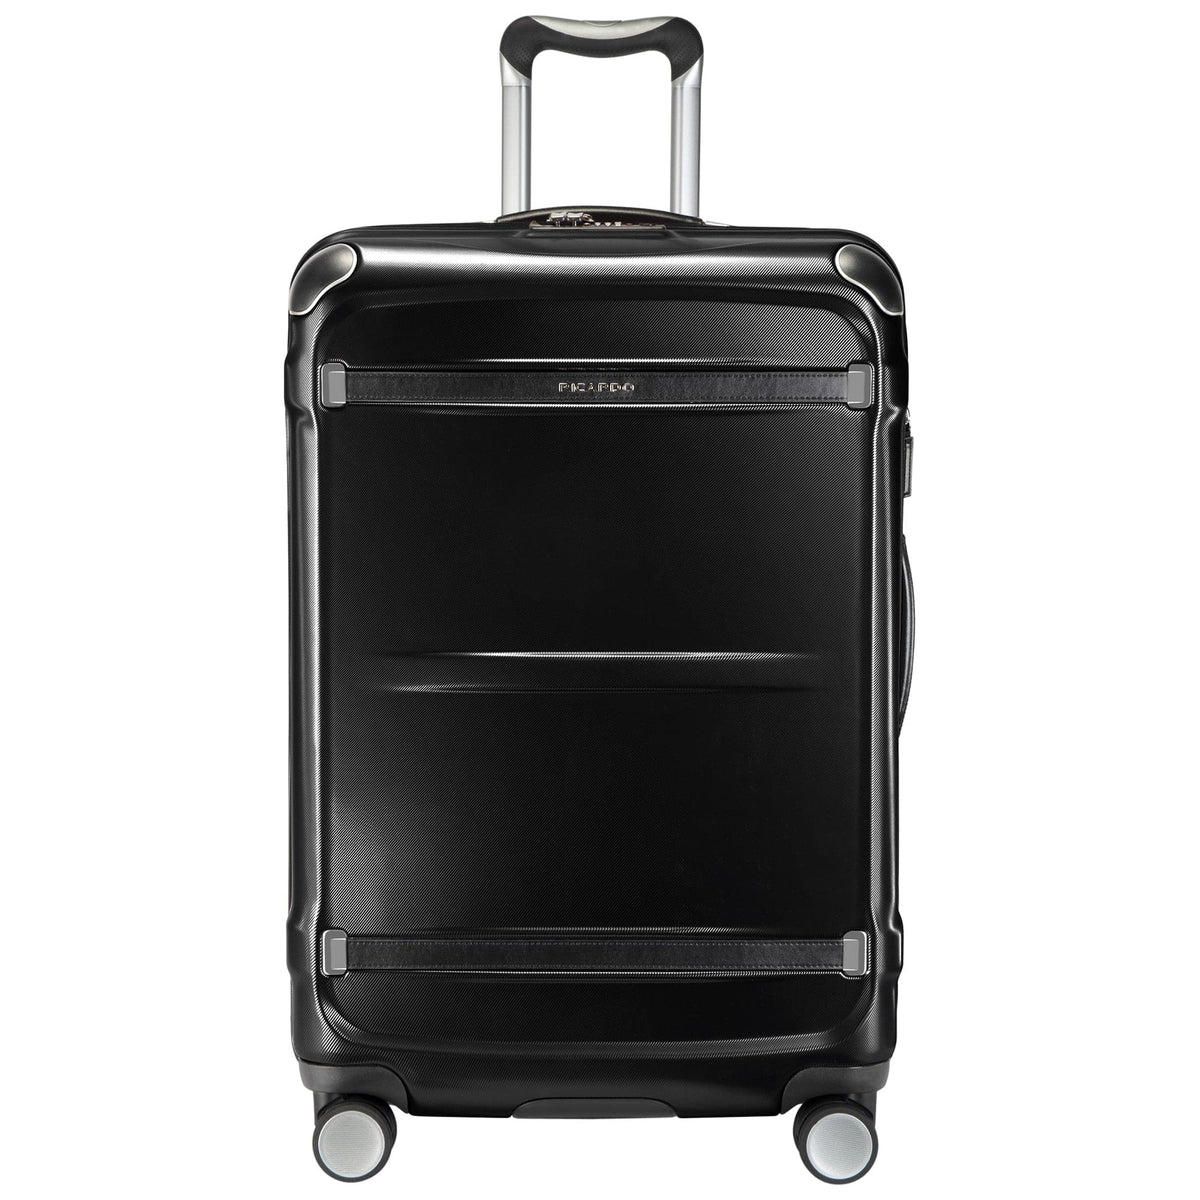 Ricardo Beverly Hills Rodeo Drive Medium Check In Luggage